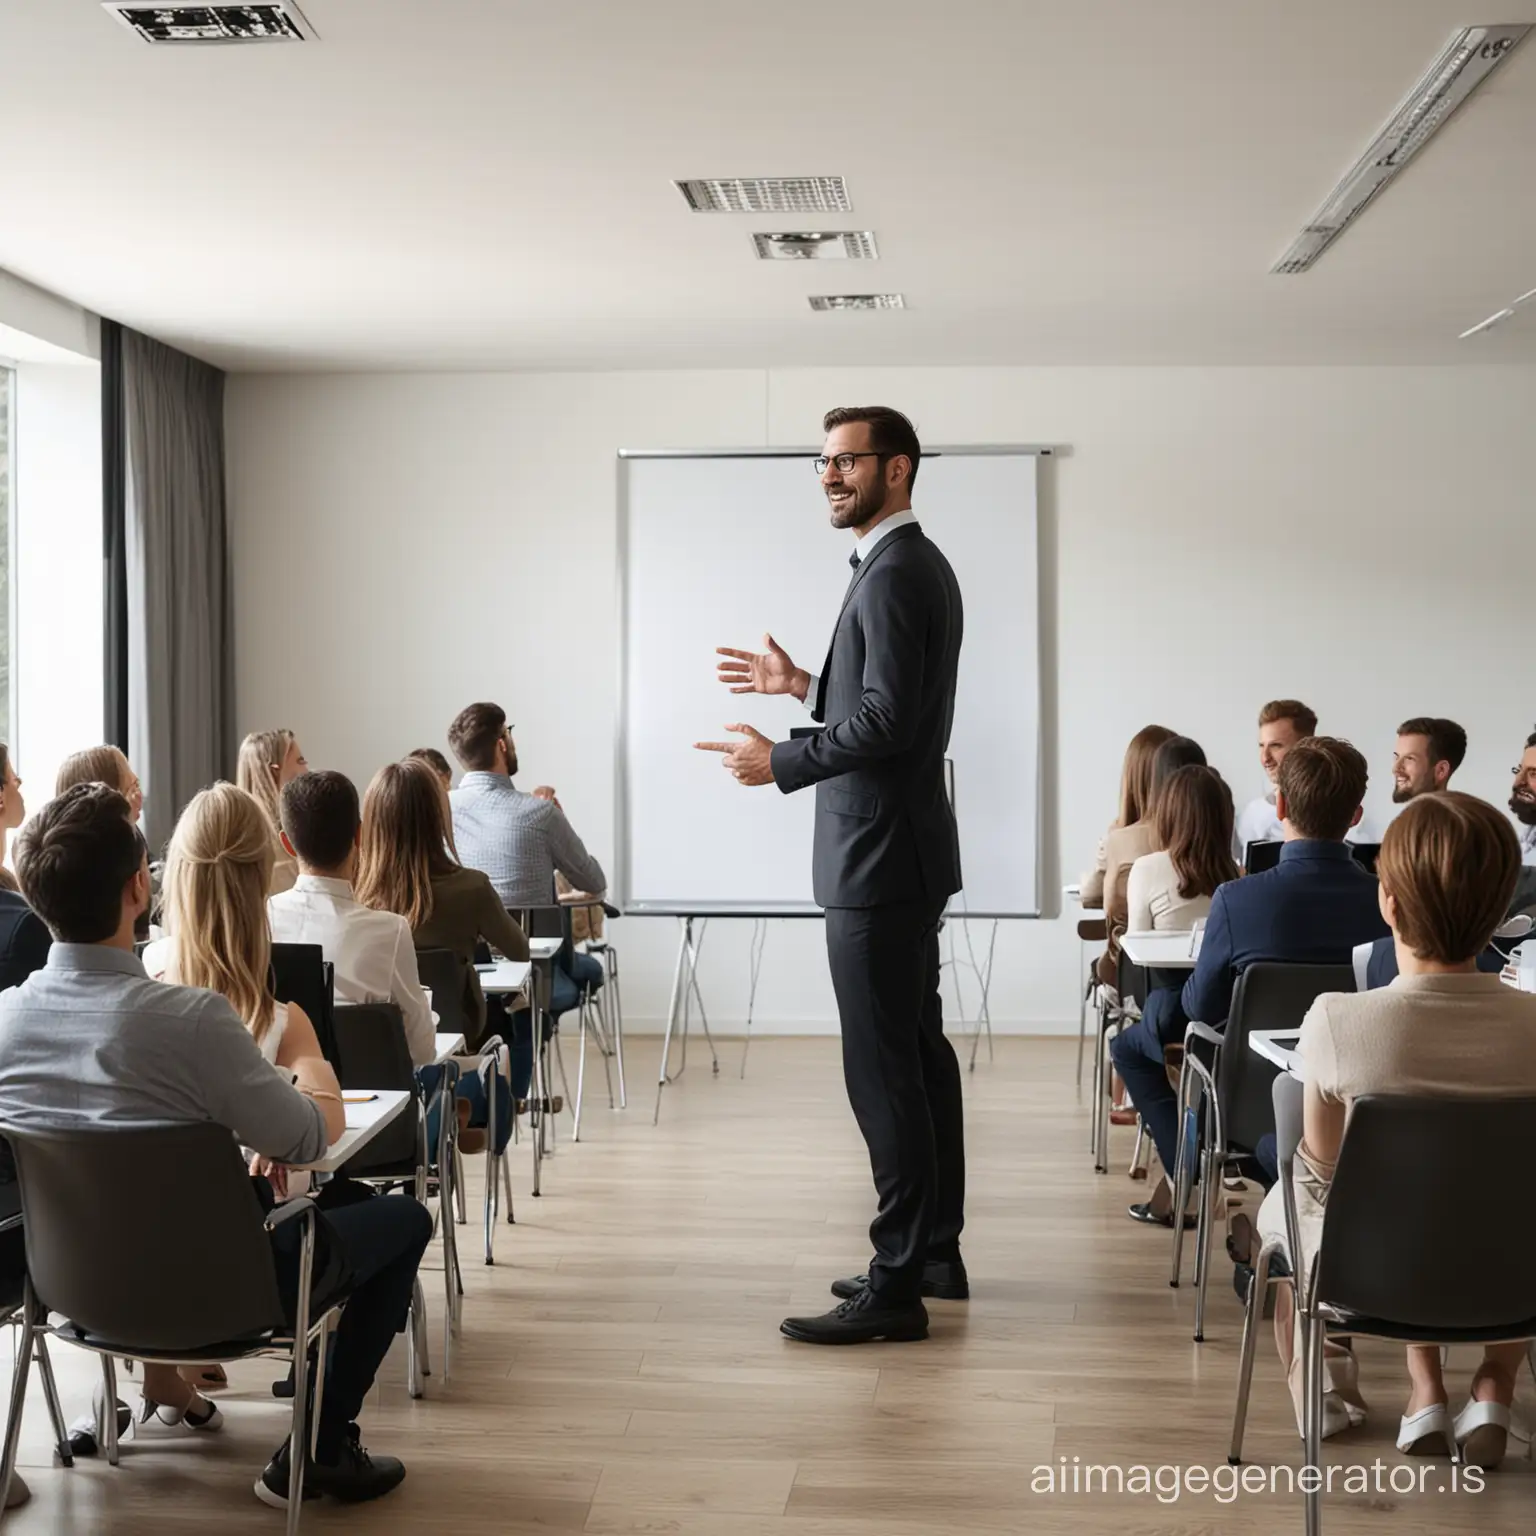 Businessman-Leading-Presentation-to-Audience-in-Conference-Room